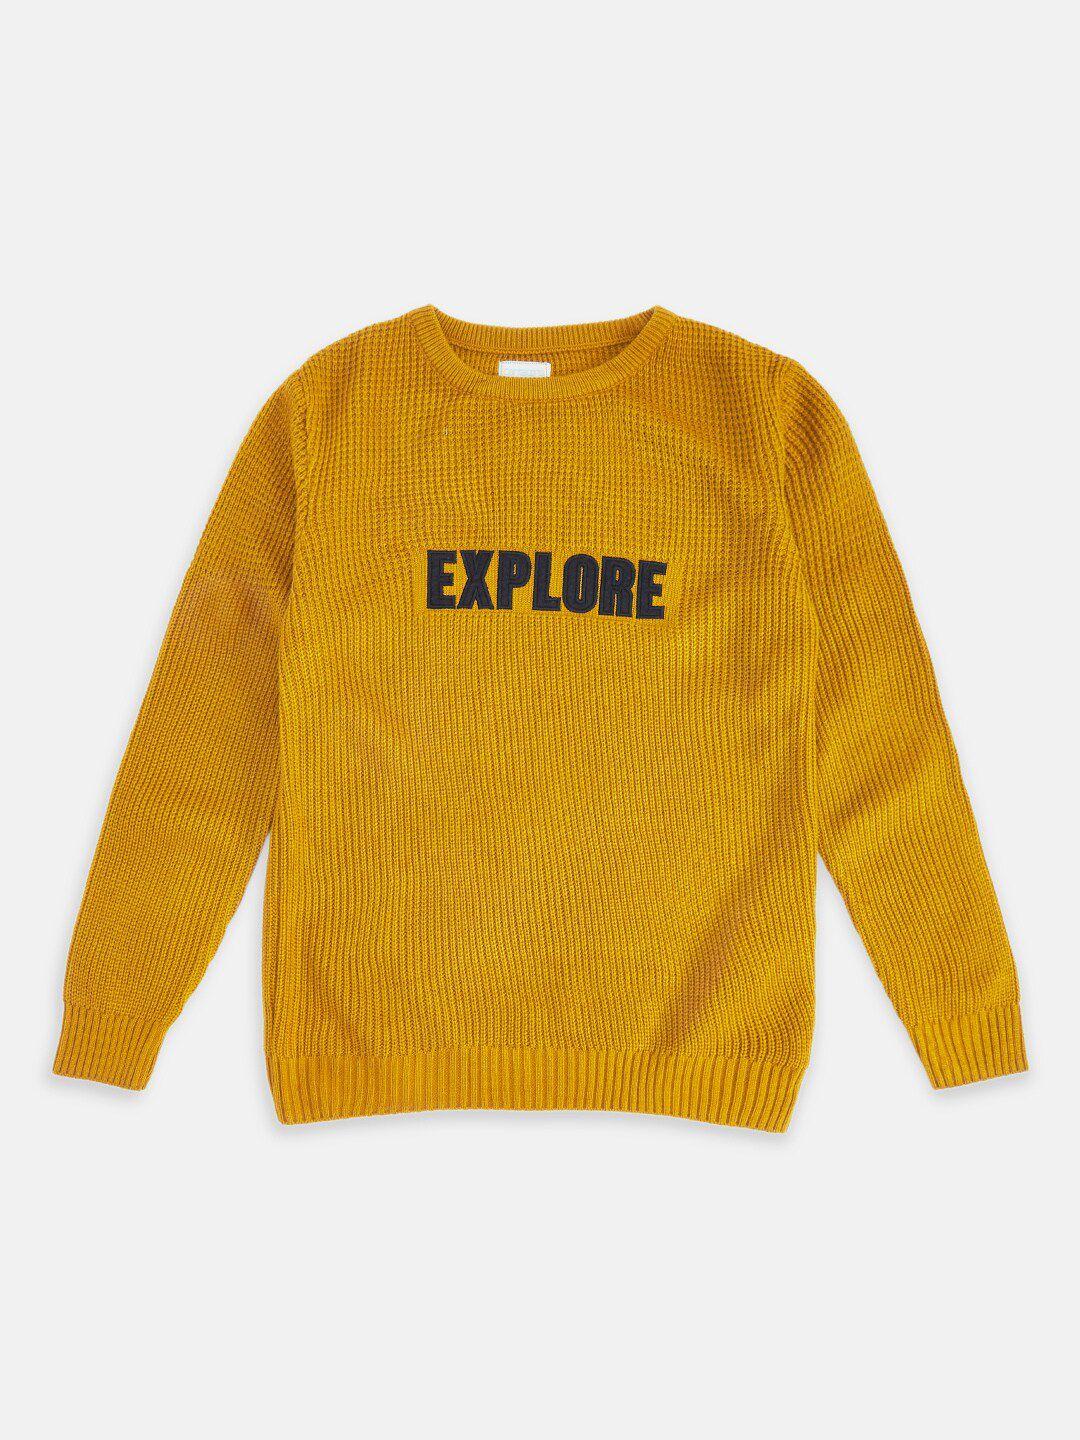 pantaloons junior boys mustard & black typography pullover with applique detail